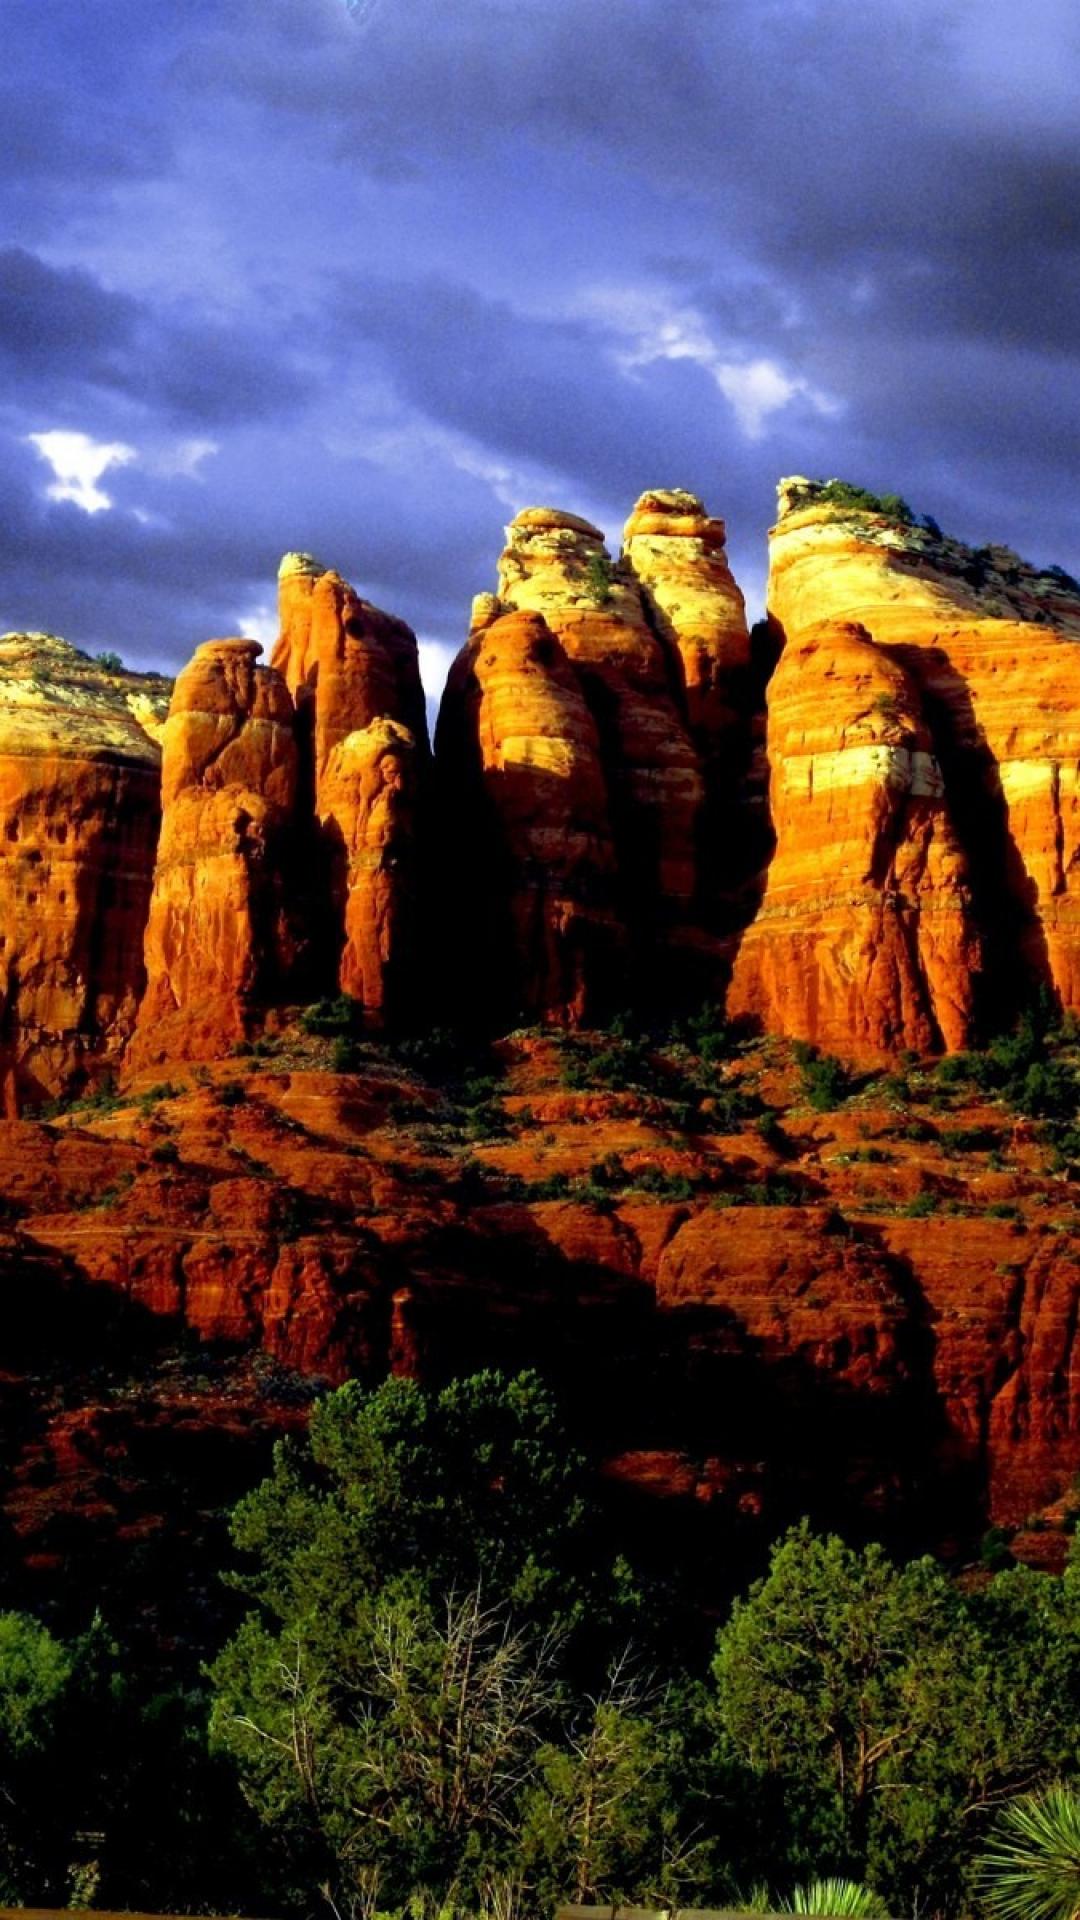 The Red Rocks Of Sedona Reflect In The Water Background Pictures Of Sedona  Background Image And Wallpaper for Free Download